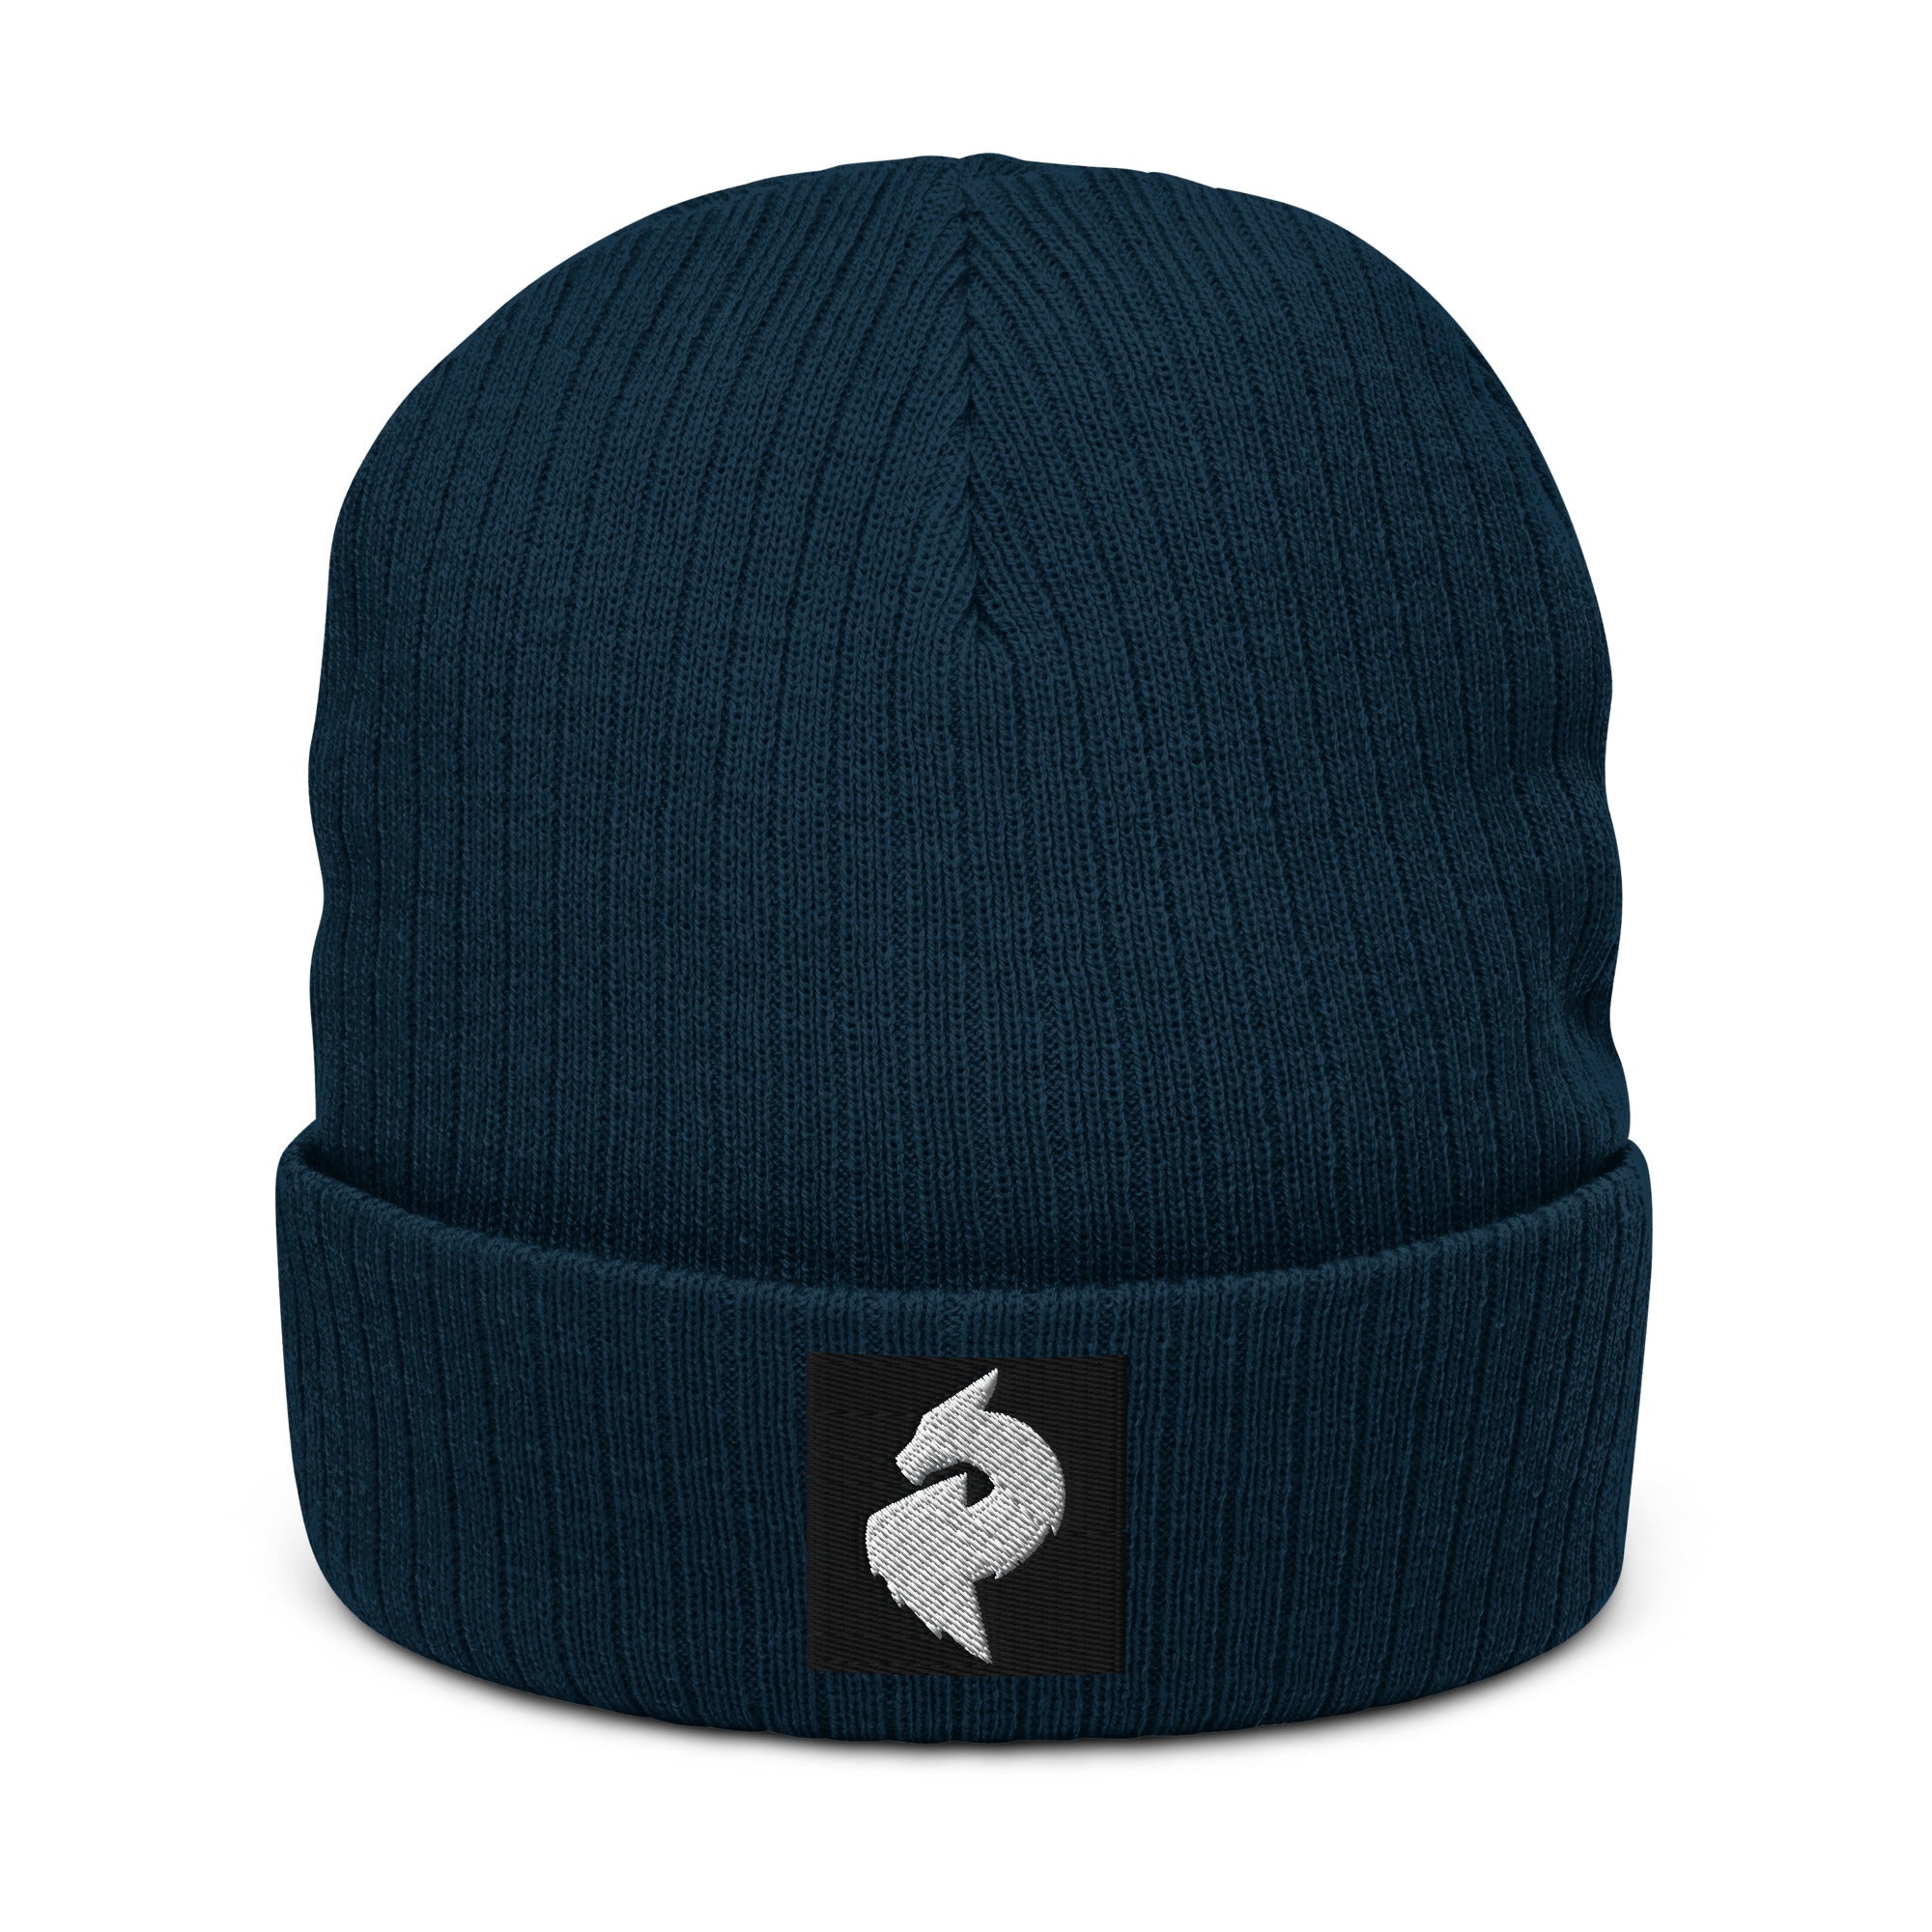 His or Hers Dragon Foxx™ Eco - Ribbed knit beanie - His or Hers Dragon Foxx™ Eco - Ribbed knit beanie - DRAGON FOXX™ - His or Hers Dragon Foxx™ Eco - Ribbed knit beanie - 2867494_13241 - Navy - - Accessories - Acid Green Eco - Ribbed knit beanie - Beanie